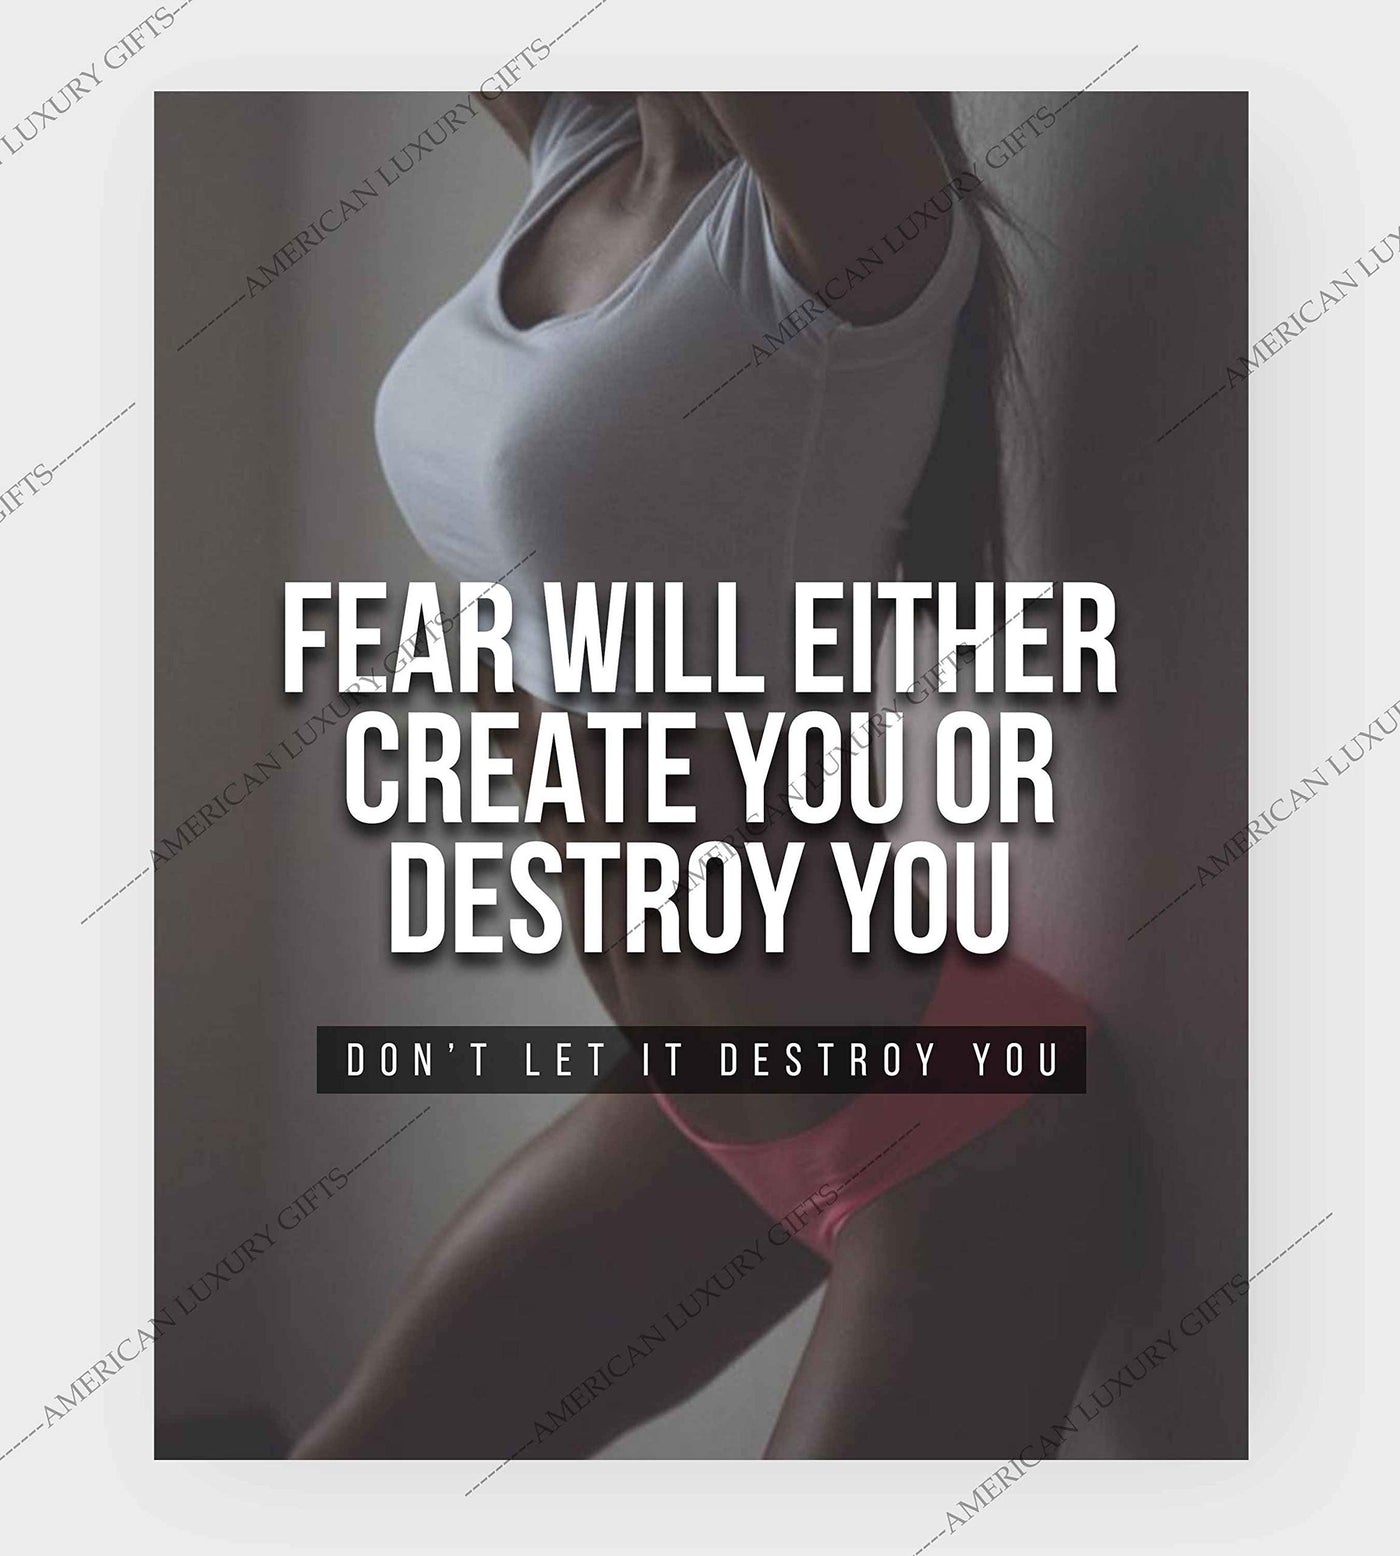 Fear Will Either Create or Destroy You Motivational Exercise Sign -8 x 10" Wall Art Print-Ready to Frame. Inspirational Fitness Print for Home-Office-Gym-Studio Decor. Great Gift of Motivation!